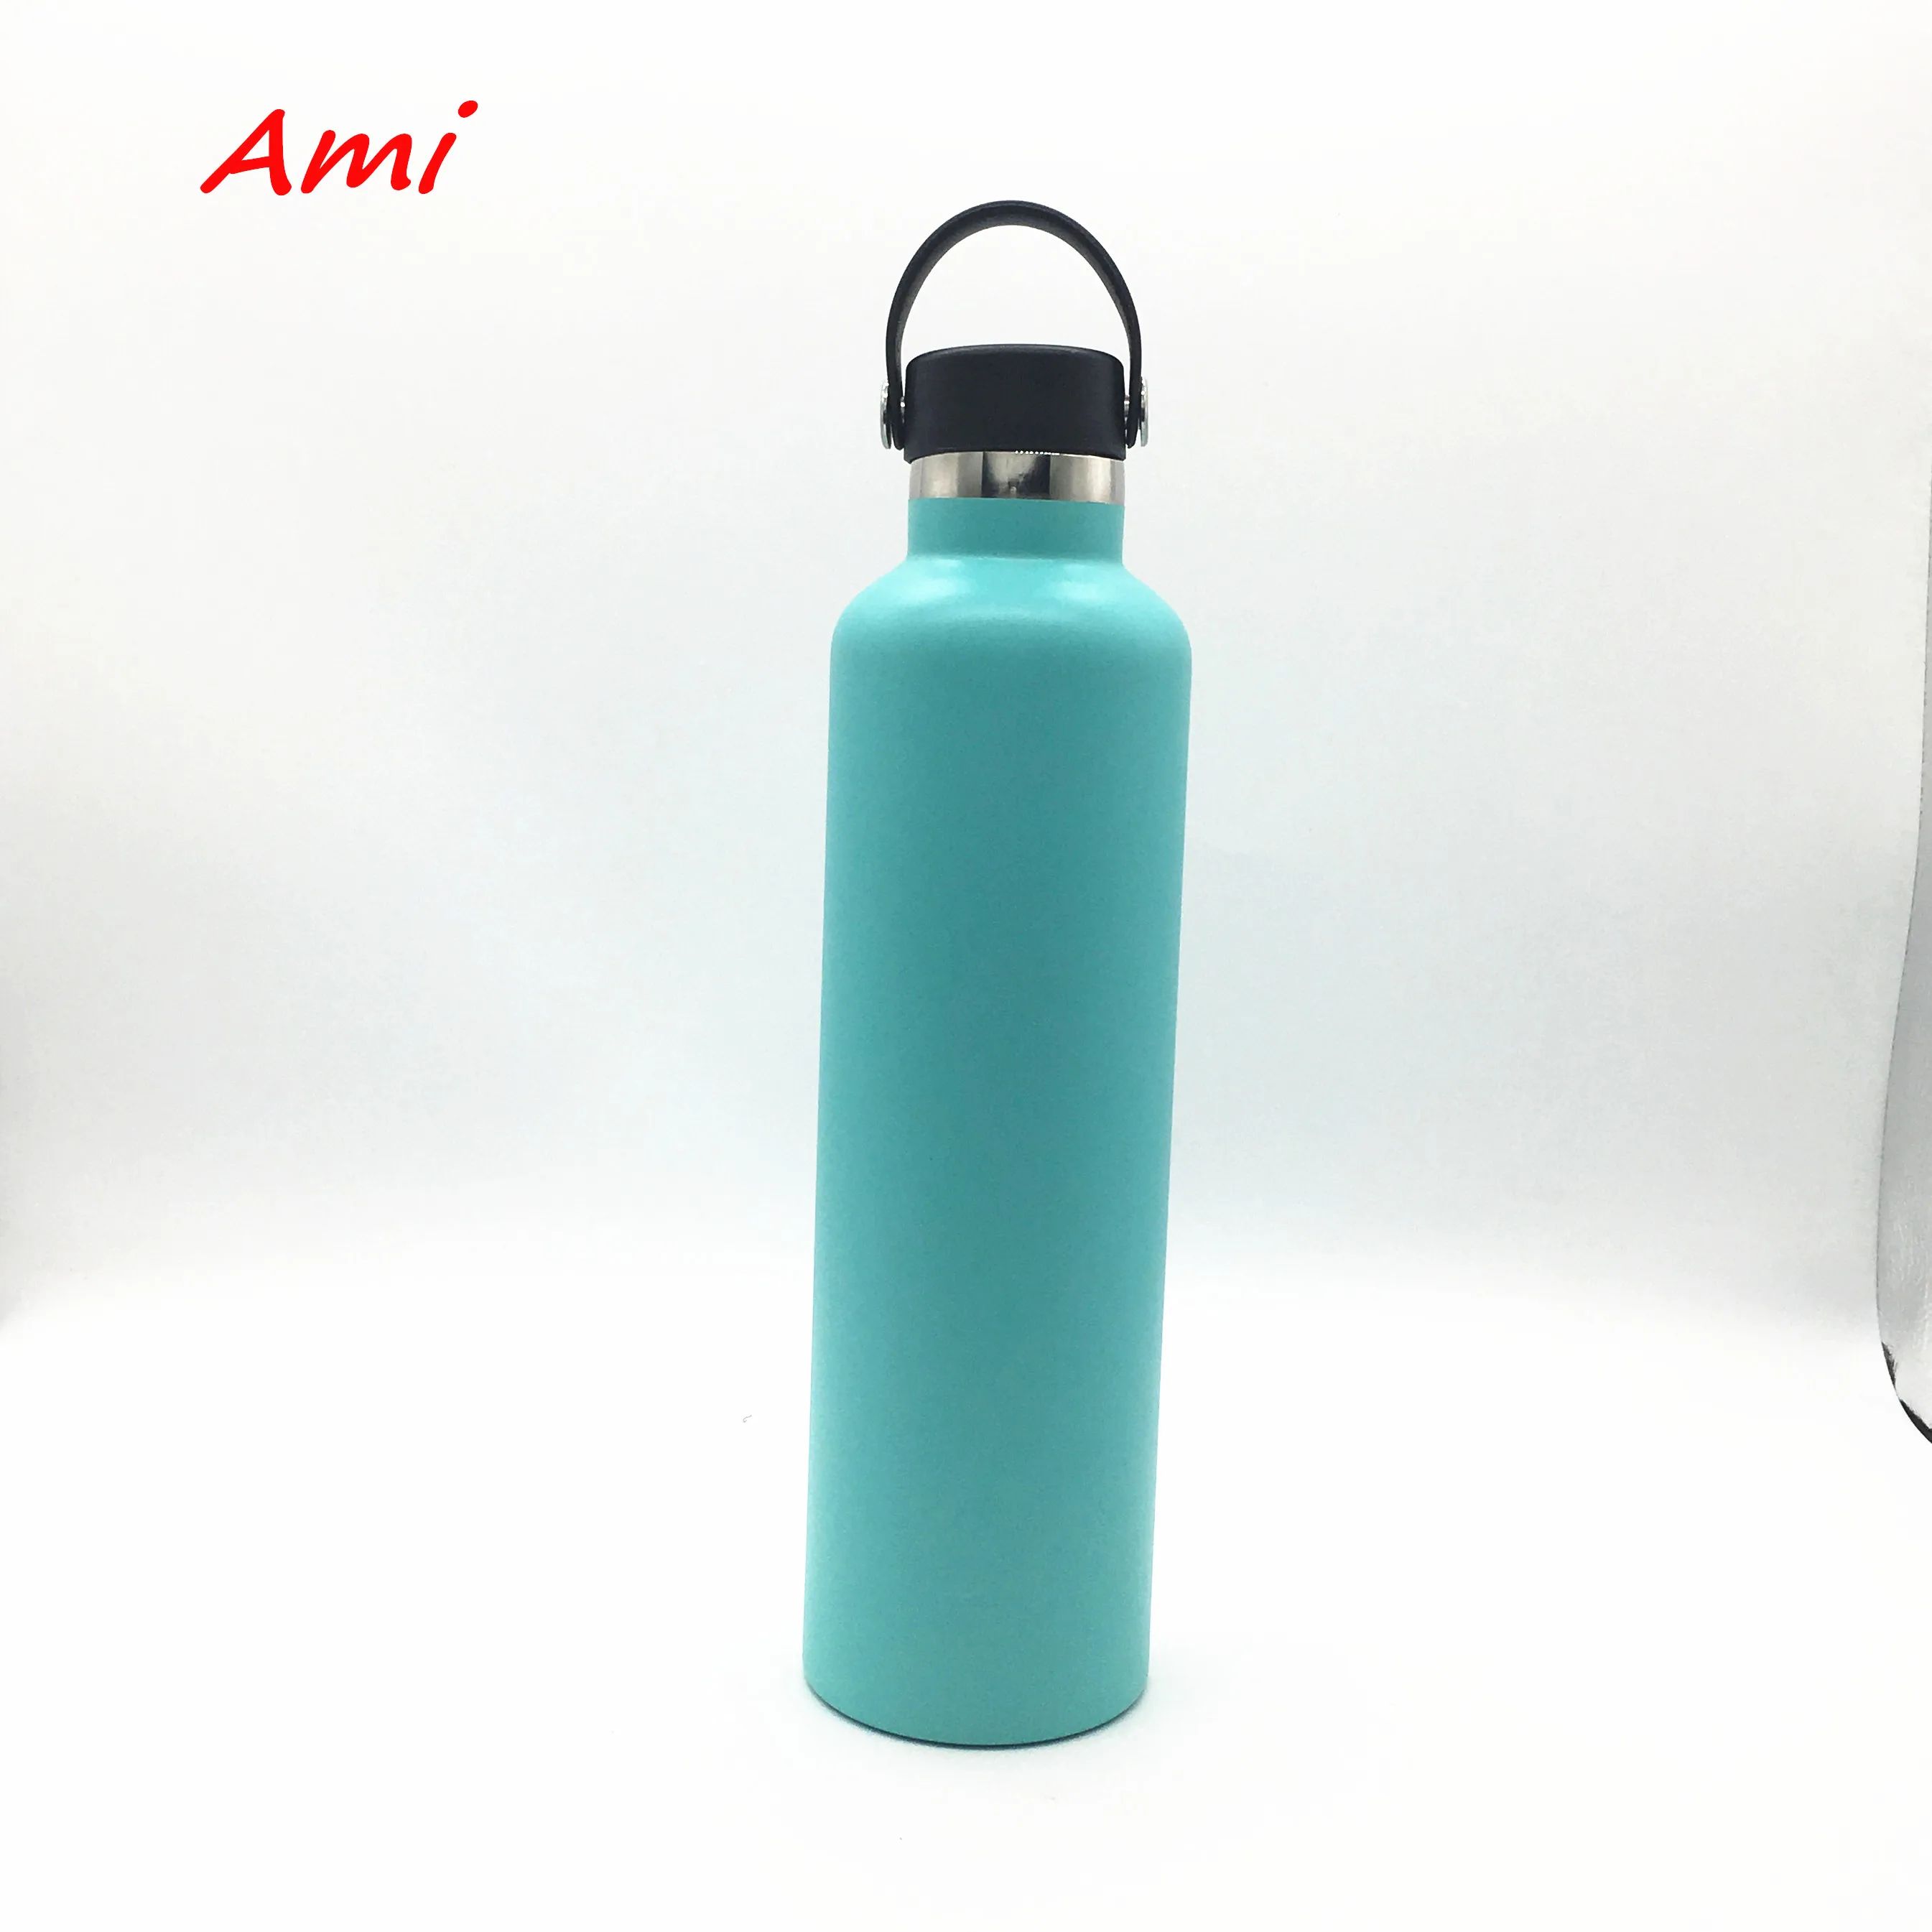 

1000ml Hydro Water Bottle Stainless Steel & Vacuum Insulated Standard Mouth with Leak Proof Flex Cap| Multiple Sizes & Colors, Custom color